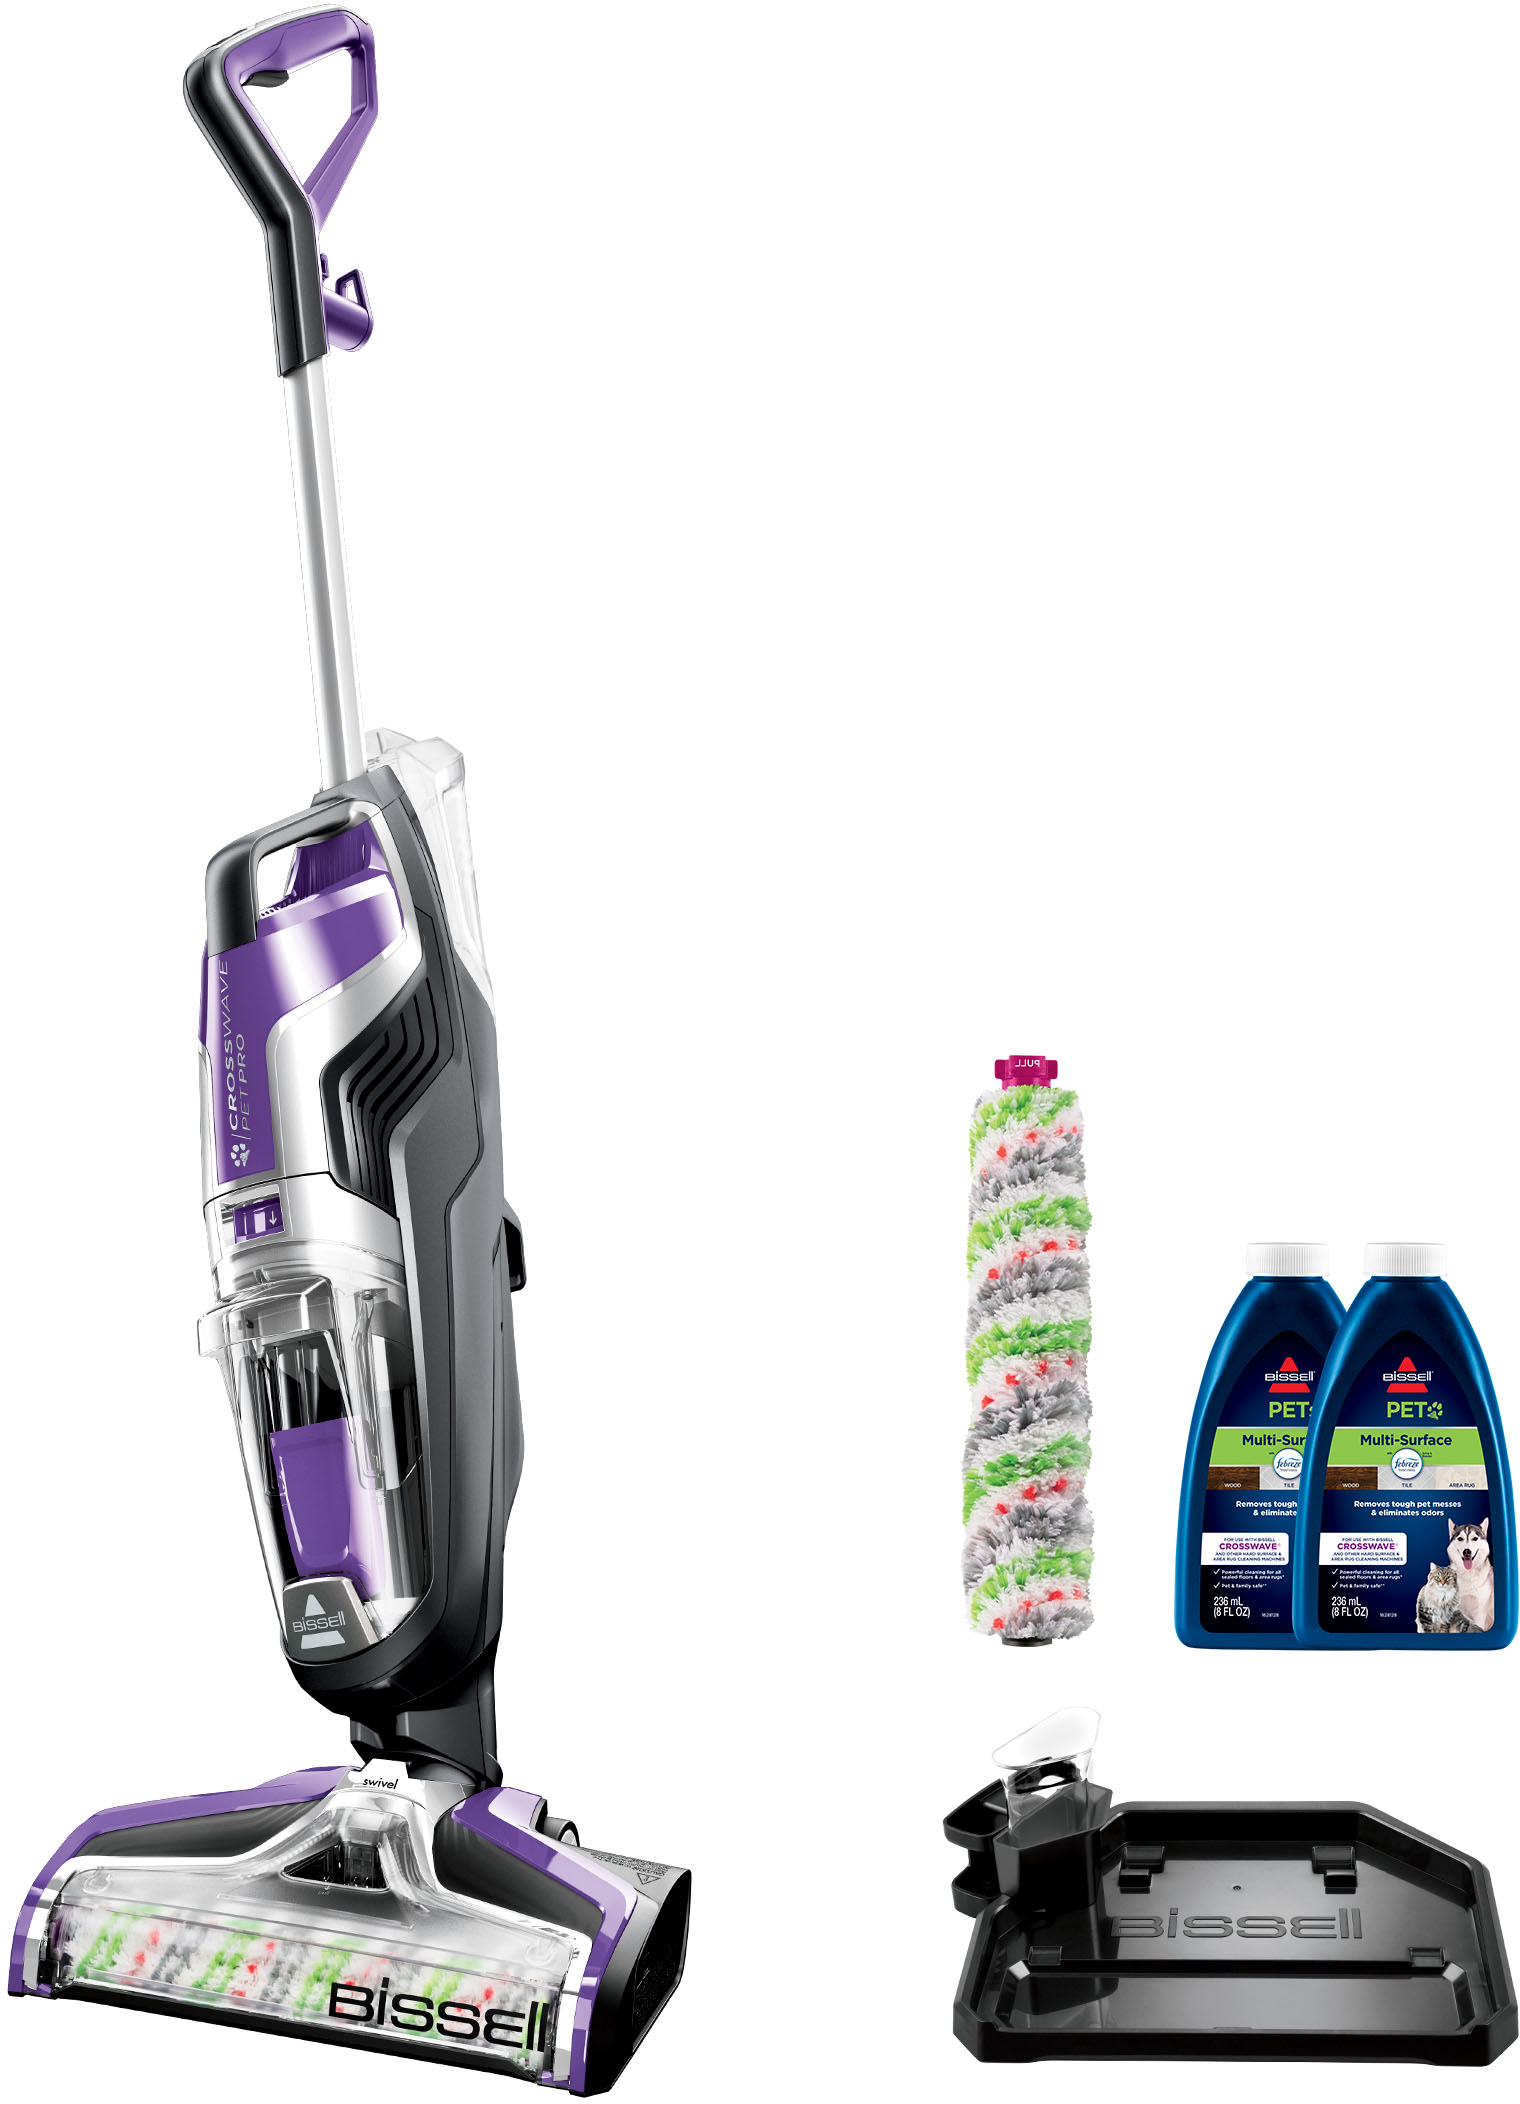 2306A BISSELL Crosswave Pet Pro All in One Wet Dry Vacuum Cleaner and Mop for Hard floors and Area Rugs